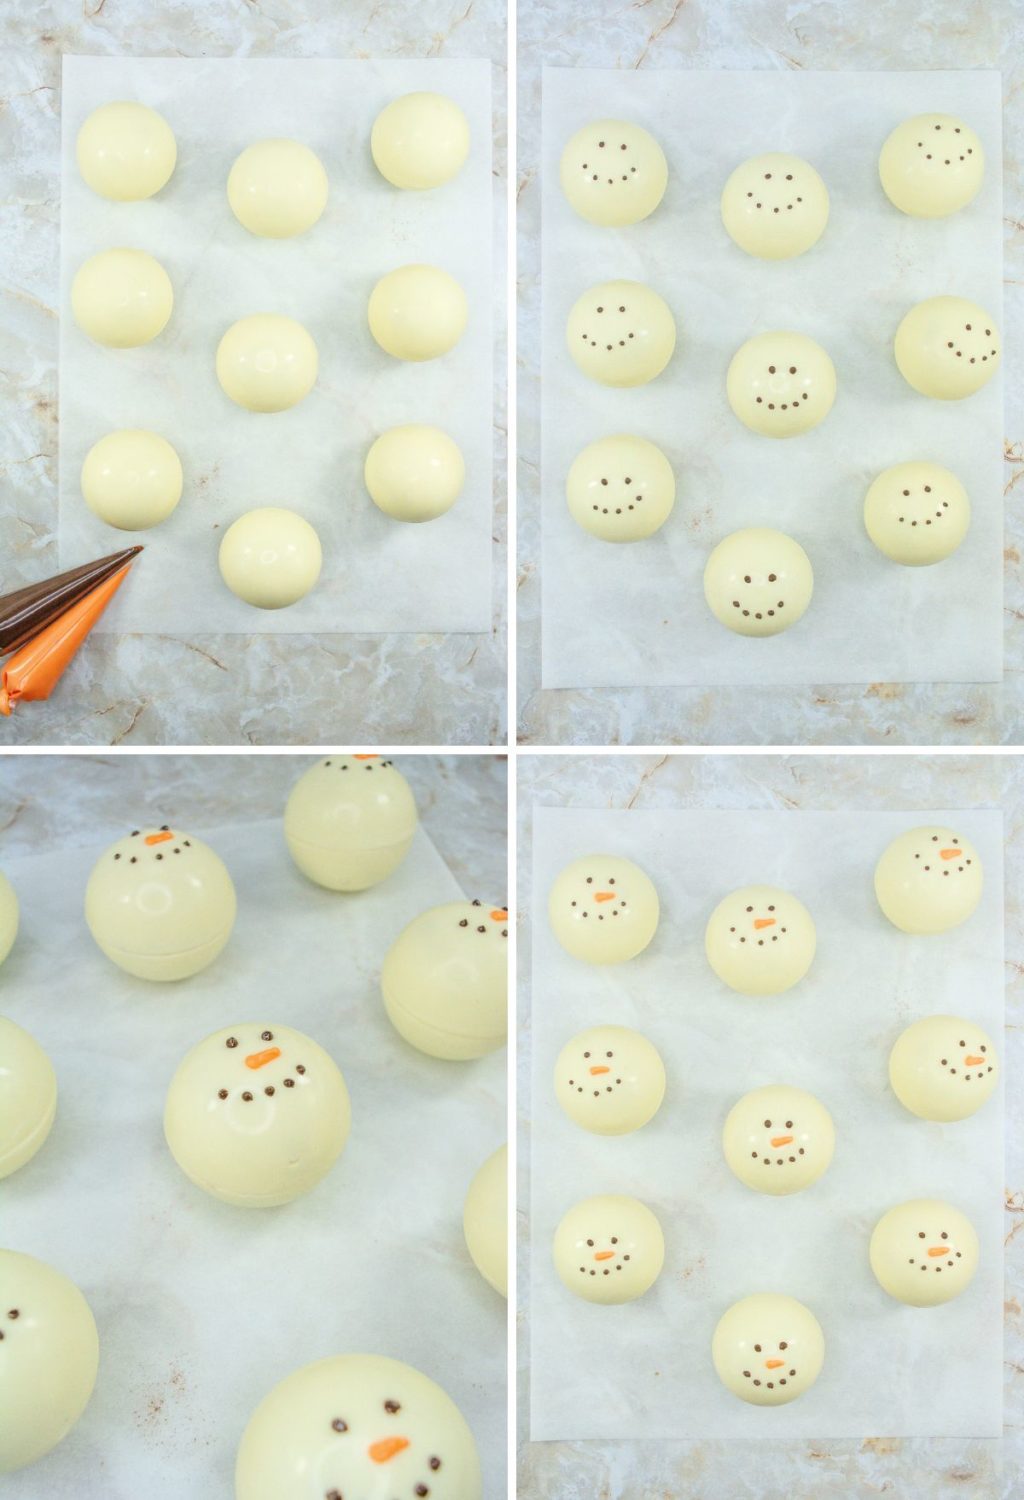 How to make snowman cookies.